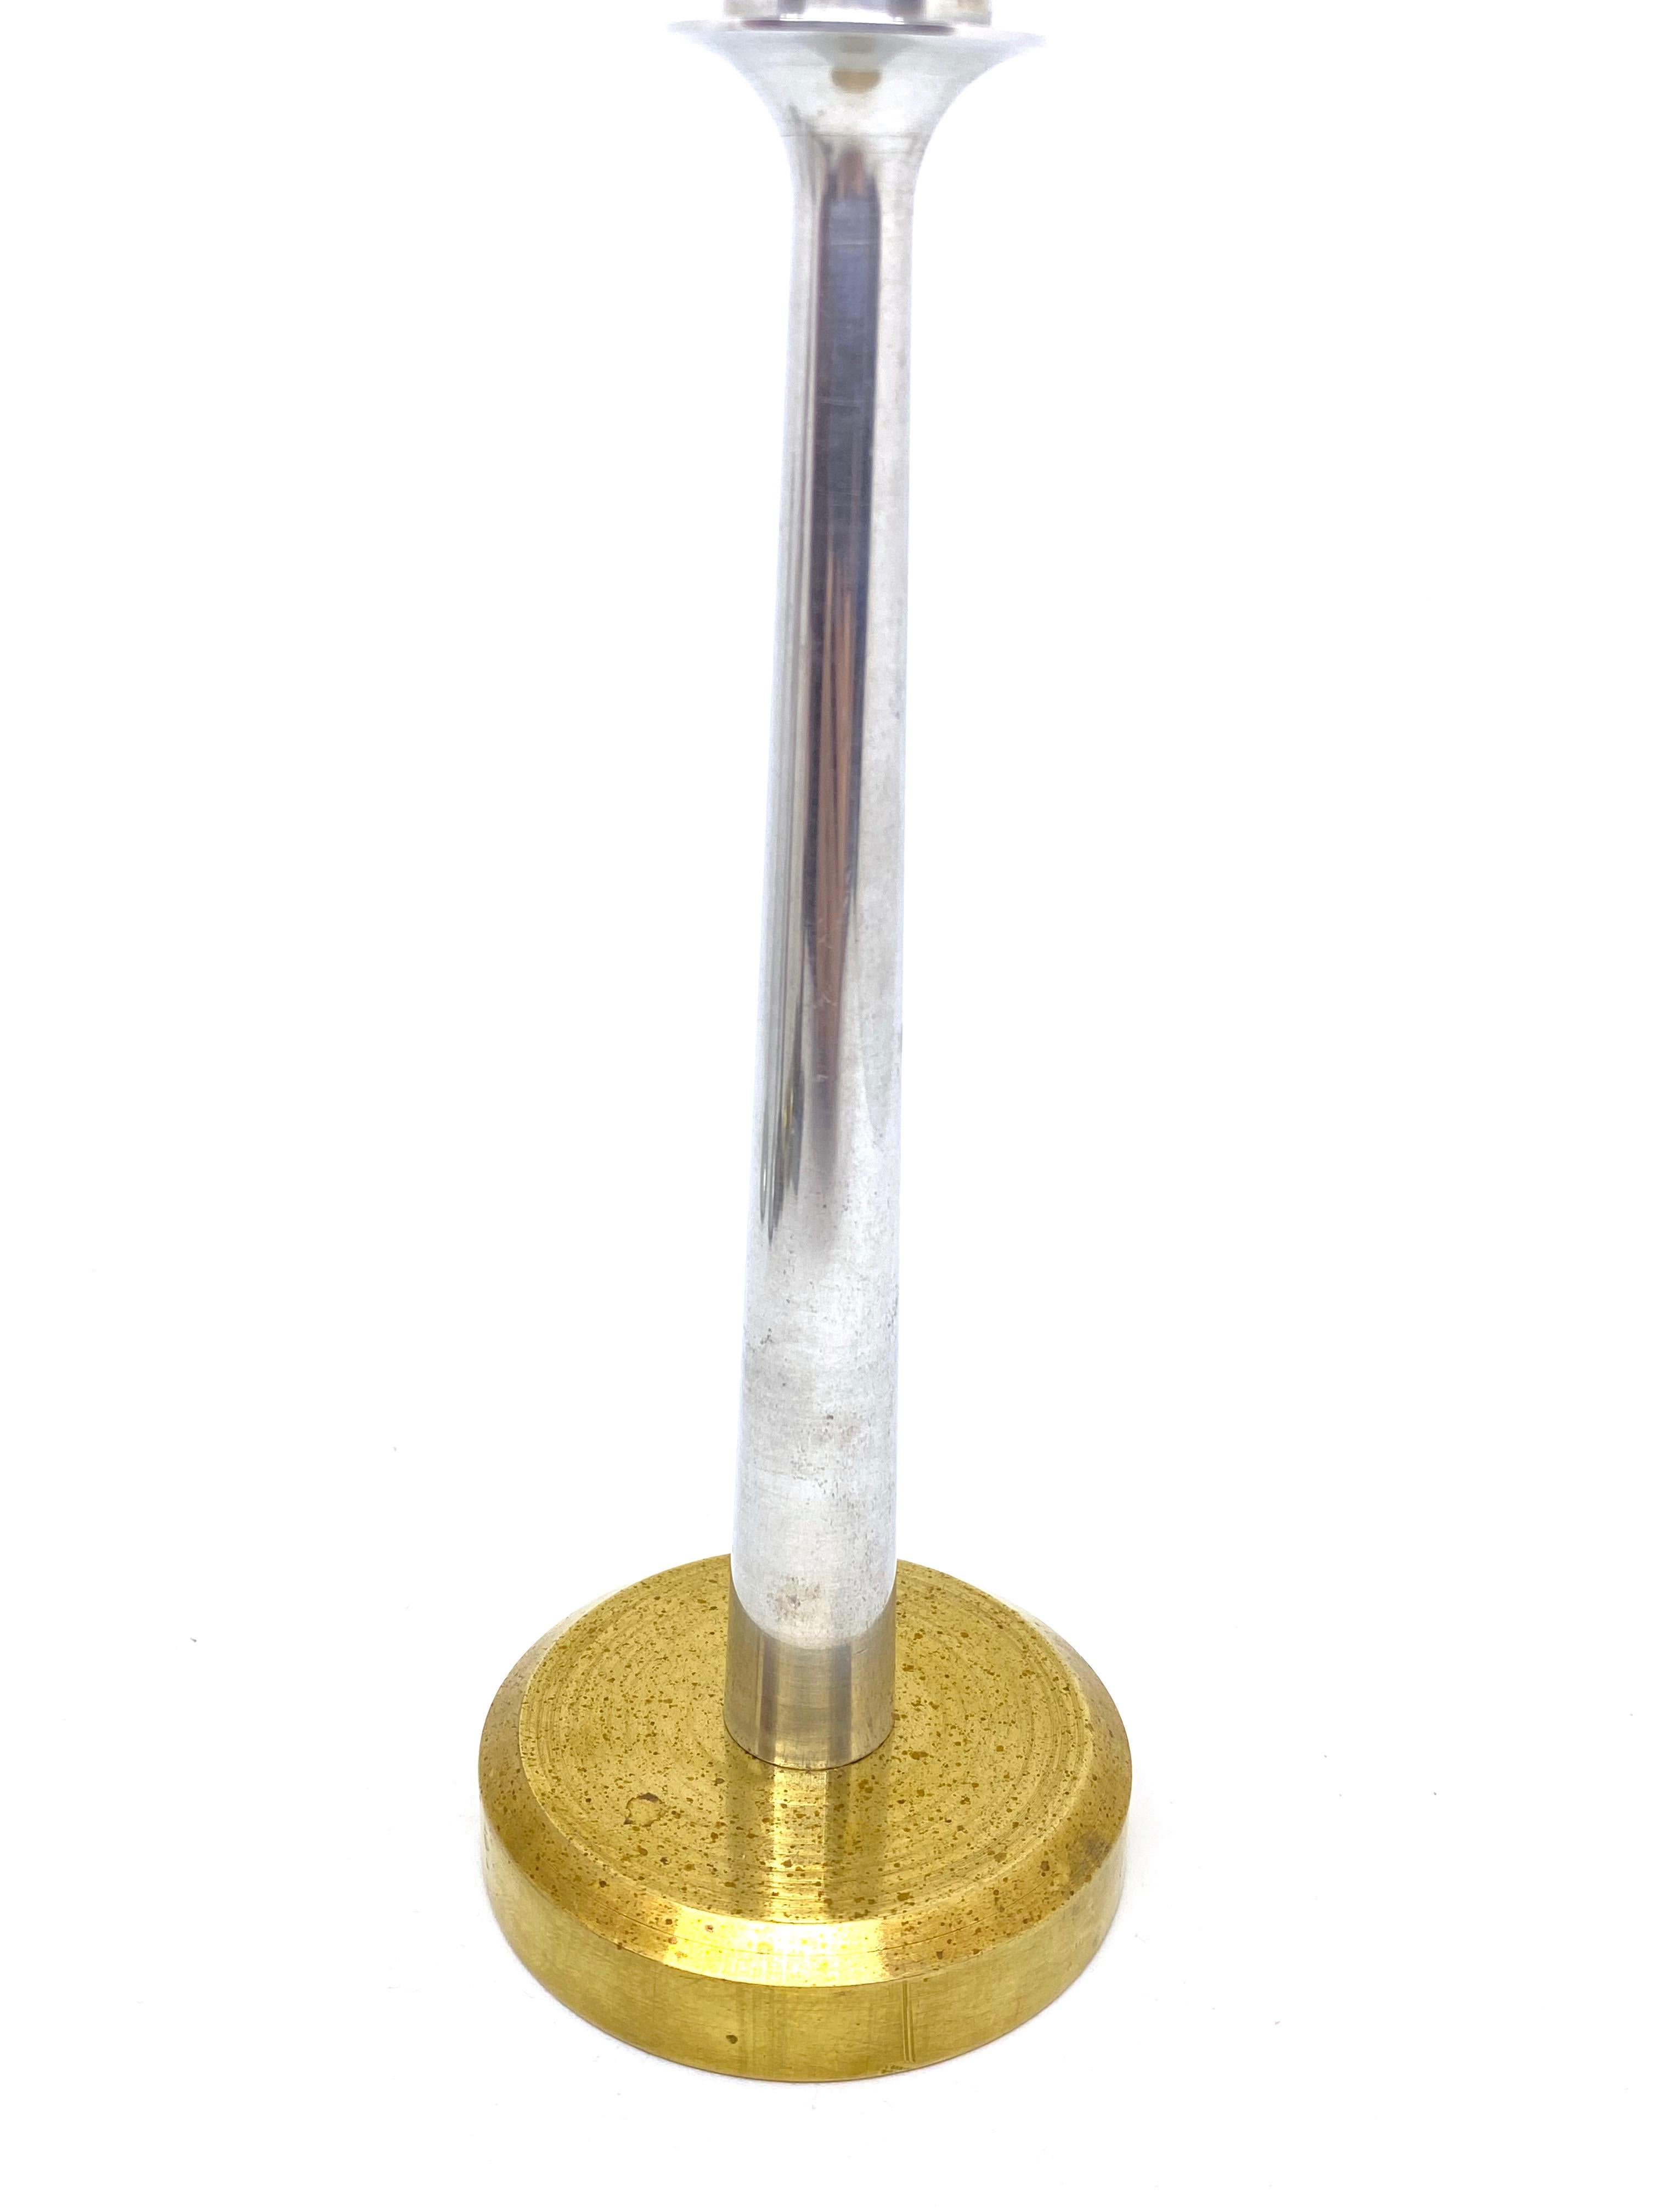 Mid-Century Modern Brass and Aluminium Munich TV Television Tower Scale Design Model, 1970s For Sale